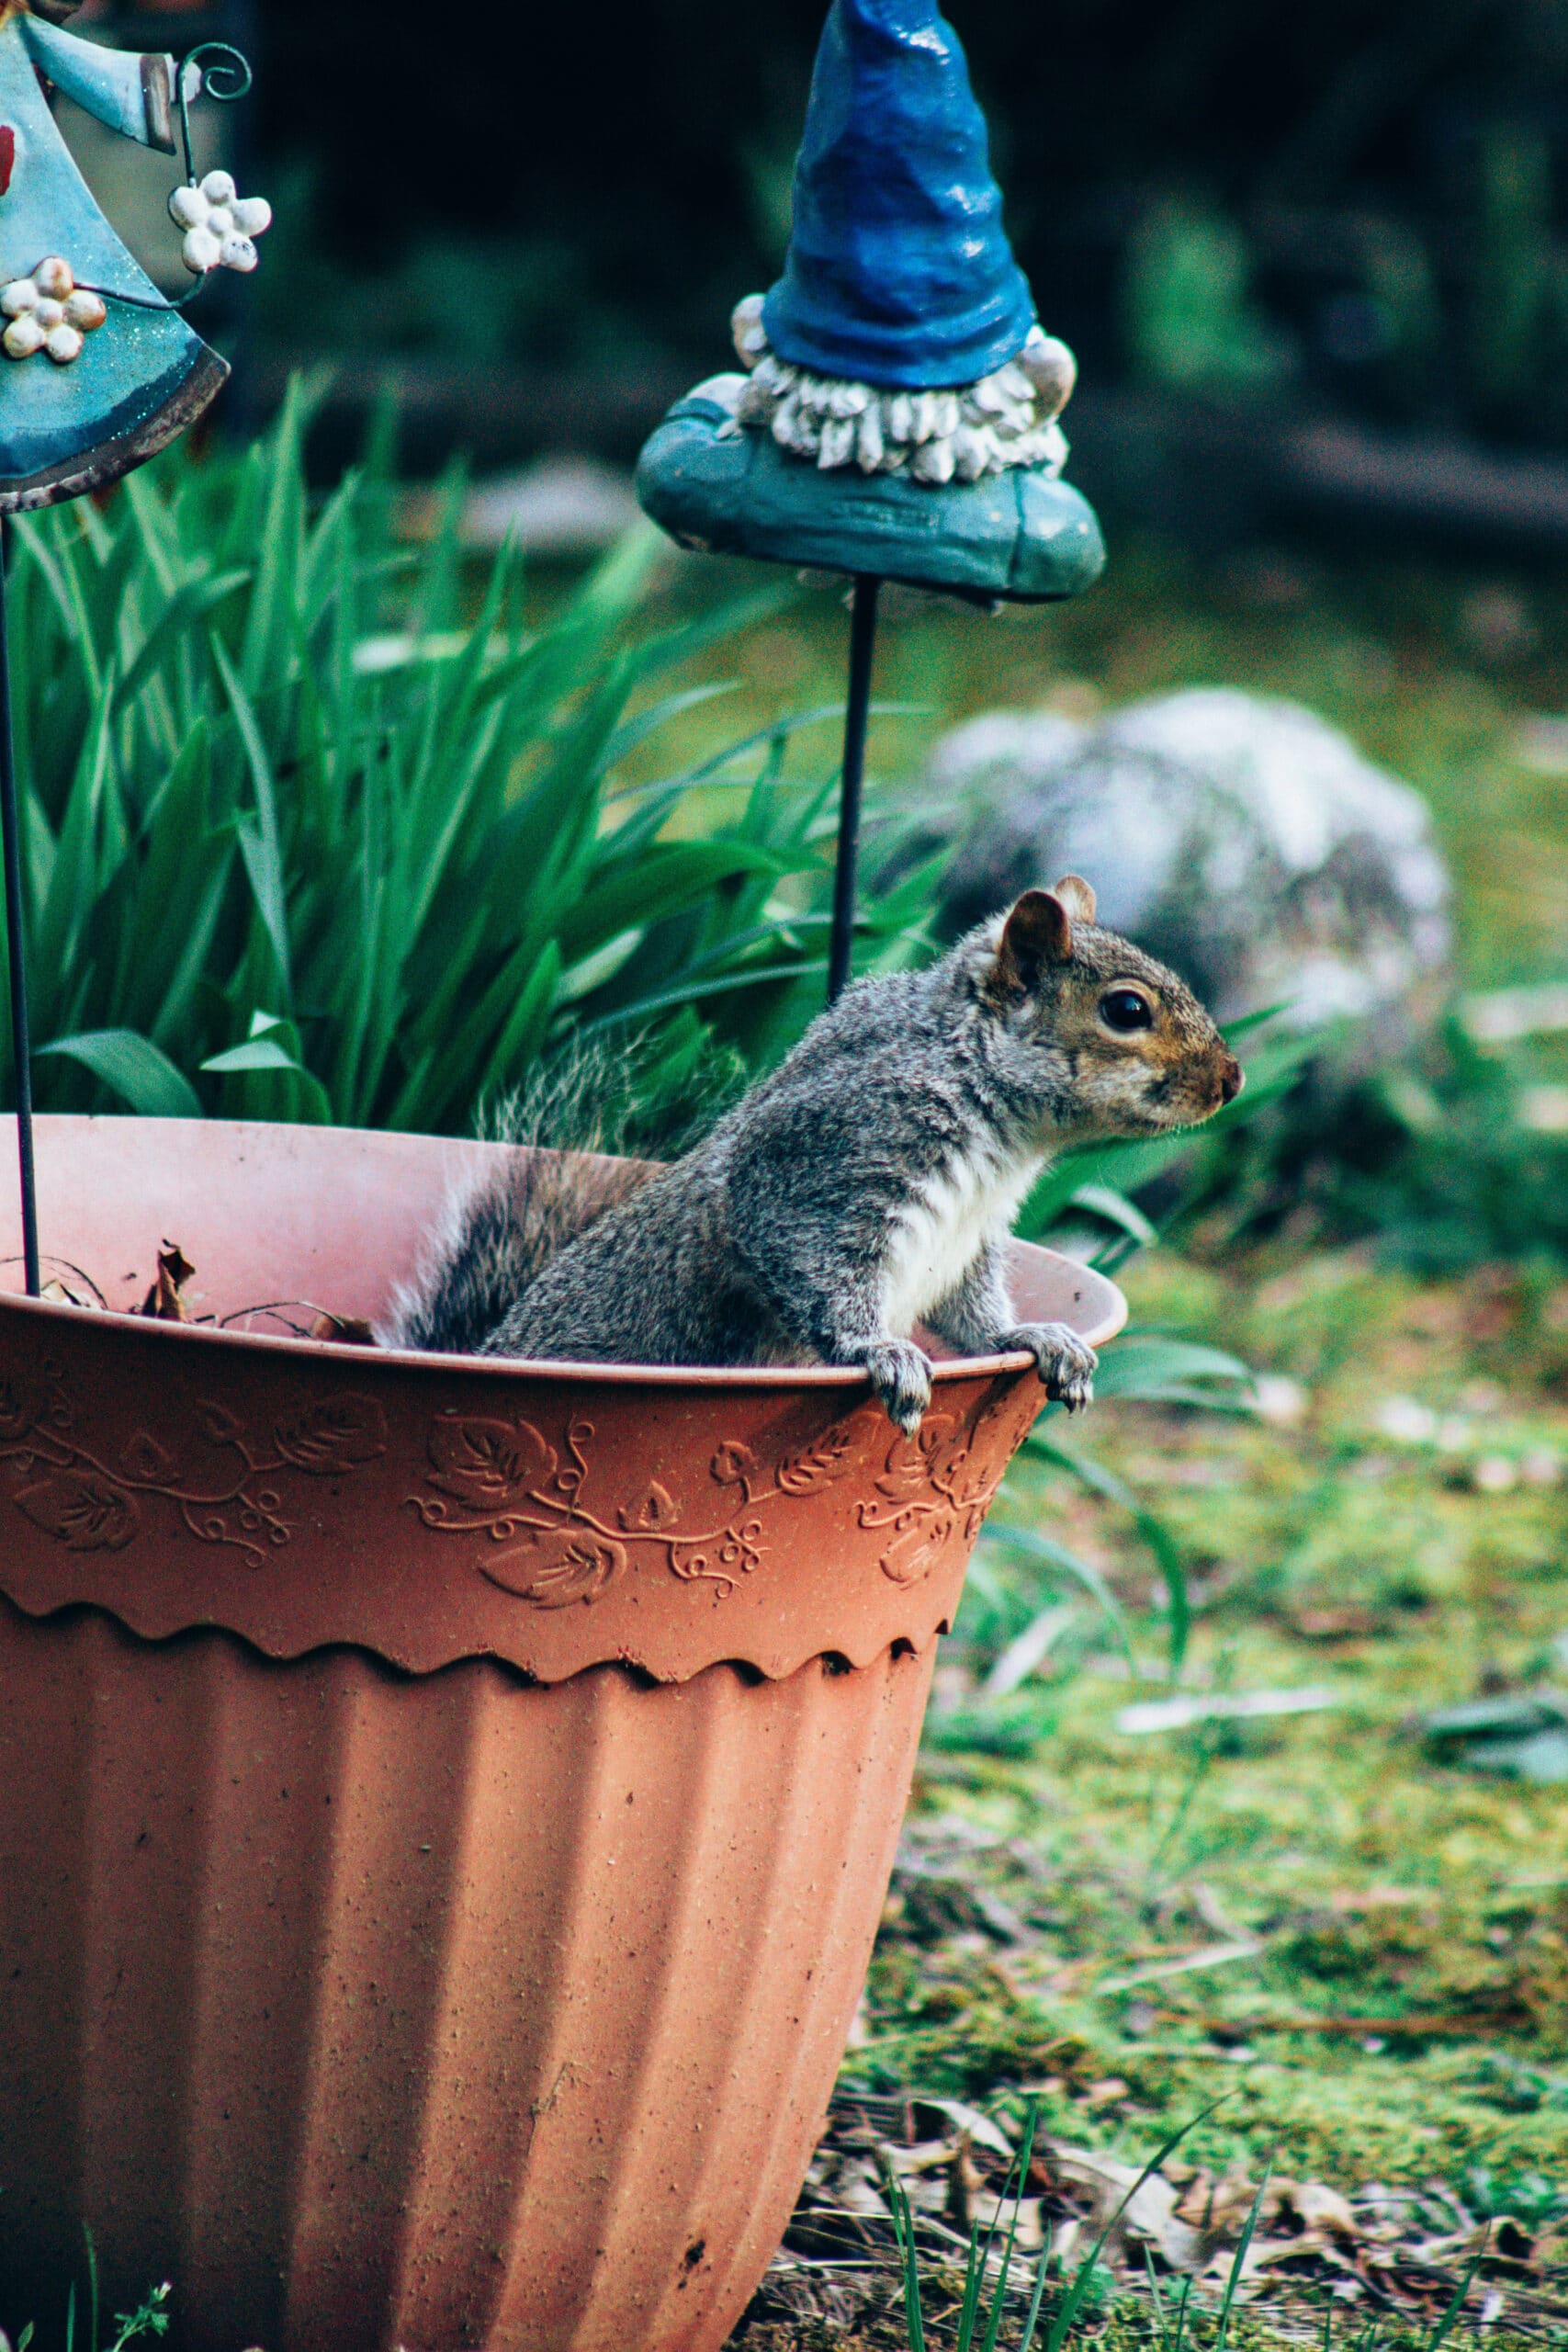 6 Tips on How to Remove Squirrels: Humane Methods